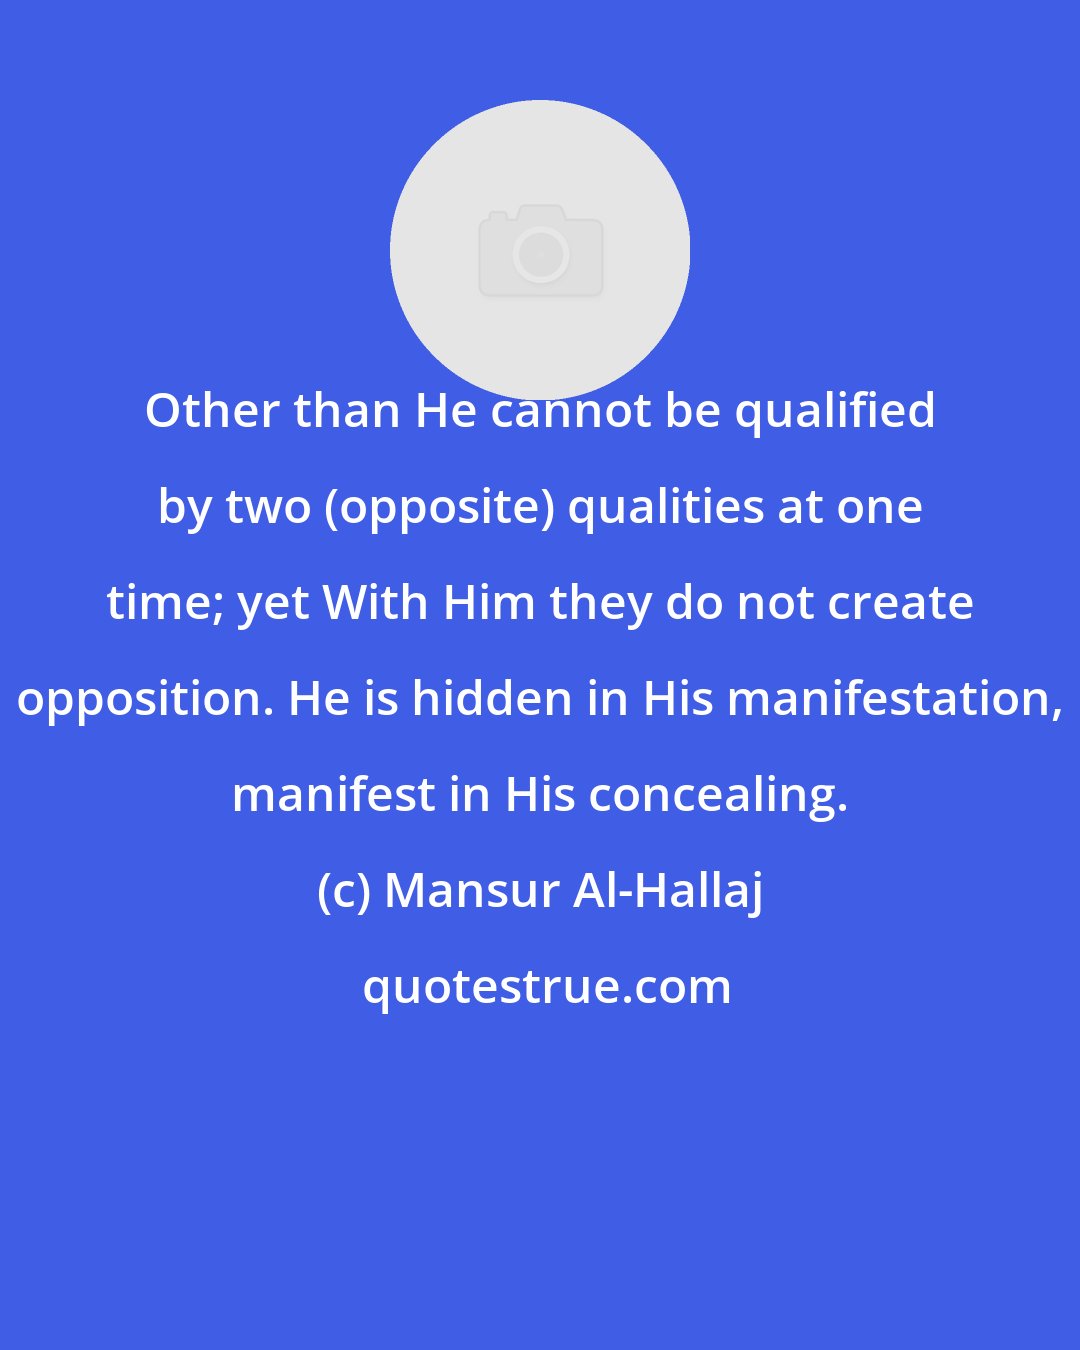 Mansur Al-Hallaj: Other than He cannot be qualified by two (opposite) qualities at one time; yet With Him they do not create opposition. He is hidden in His manifestation, manifest in His concealing.